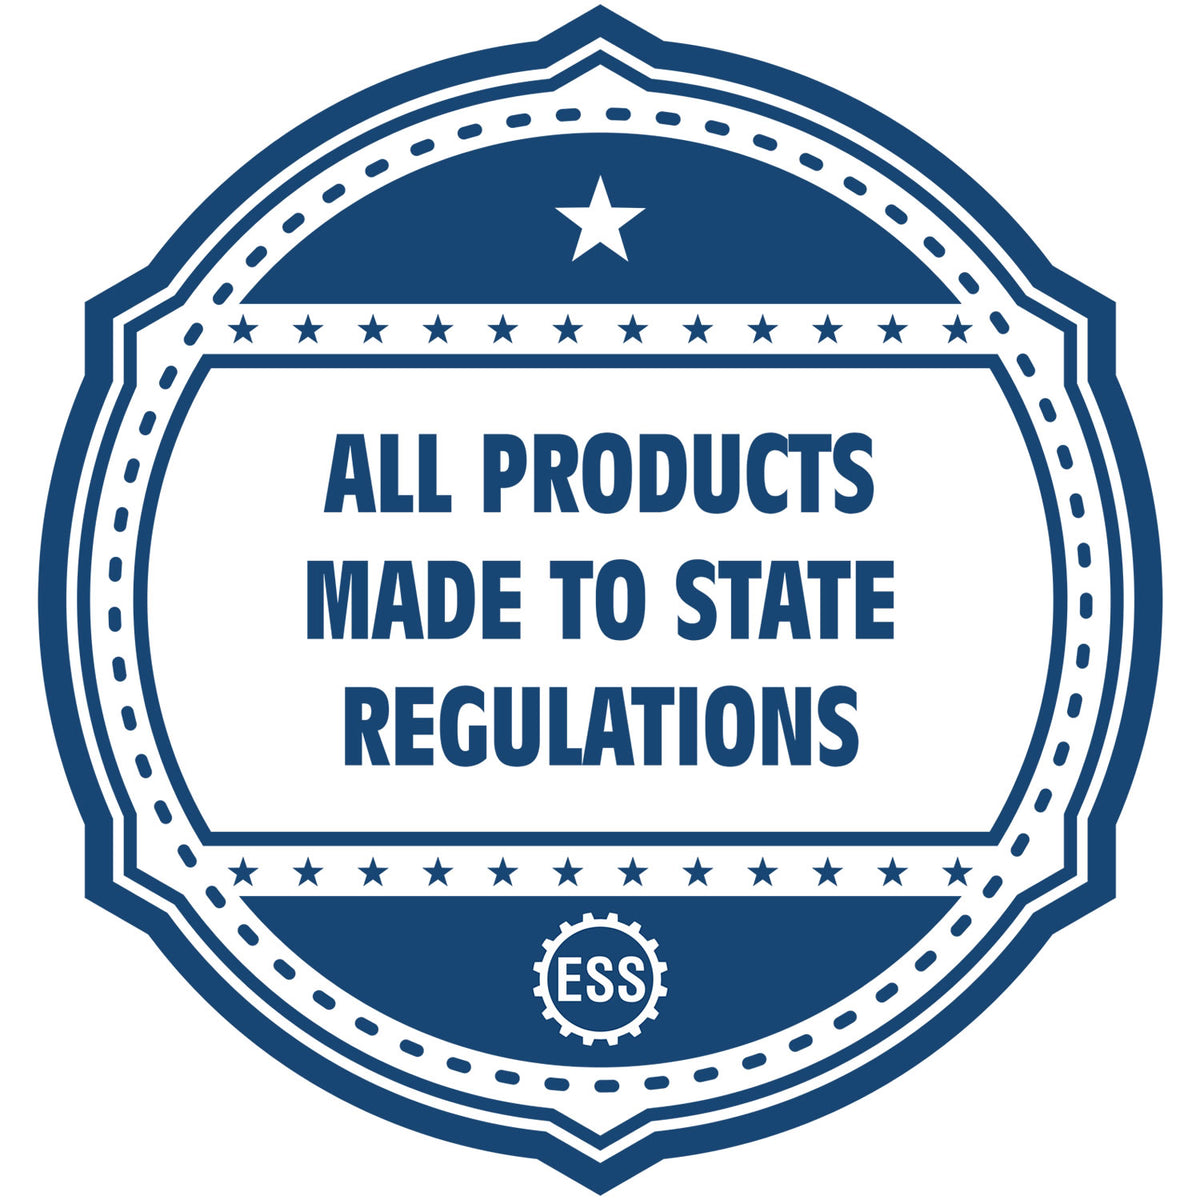 A blue icon or badge for the State of Ohio Extended Long Reach Geologist Seal showing that this product is made in compliance with state regulations.